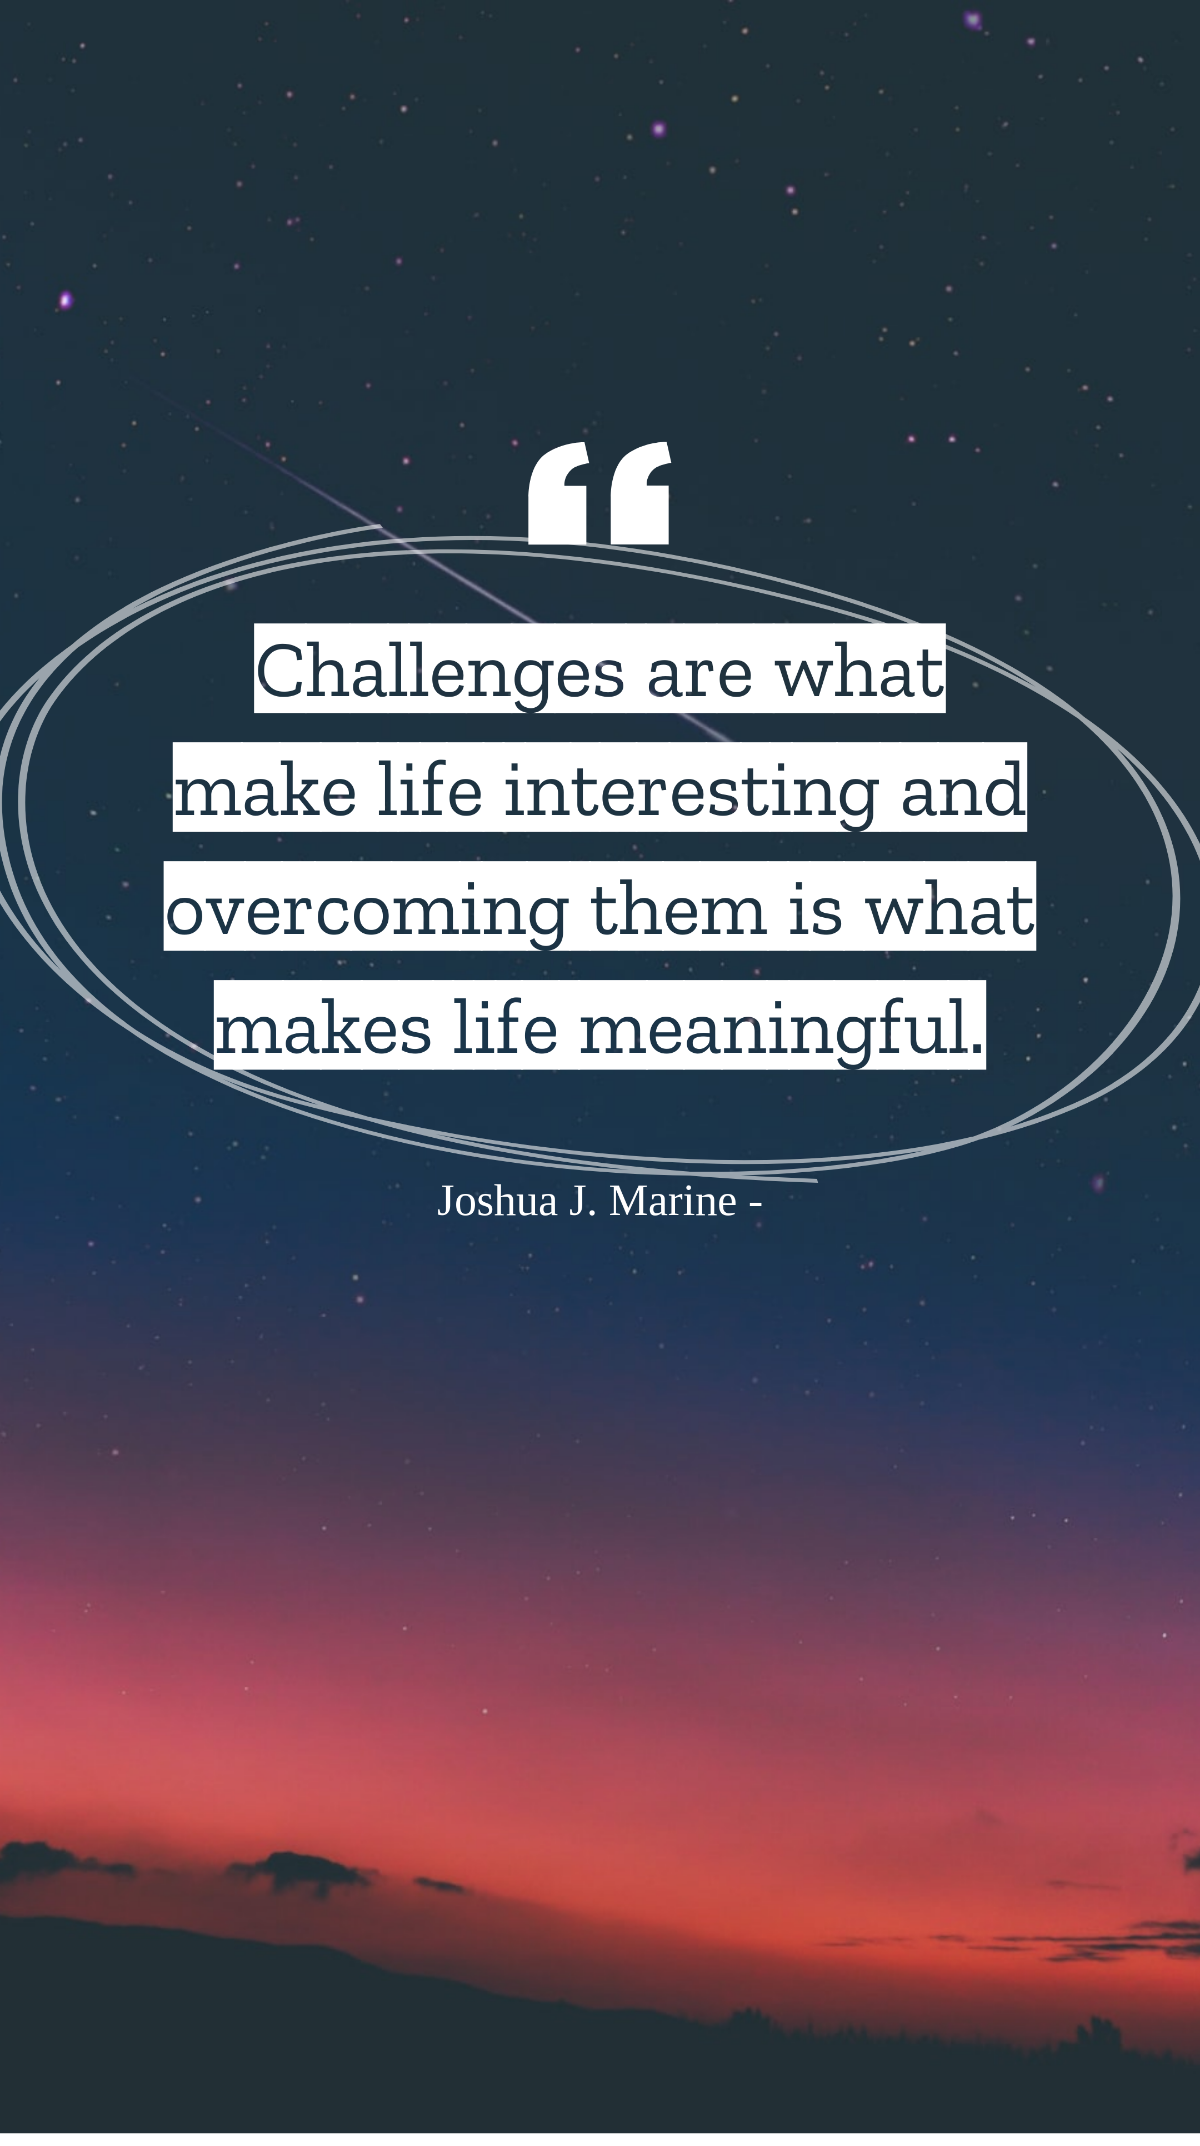 Joshua J. Marine - Challenges are what make life interesting and overcoming them is what makes life meaningful. Template